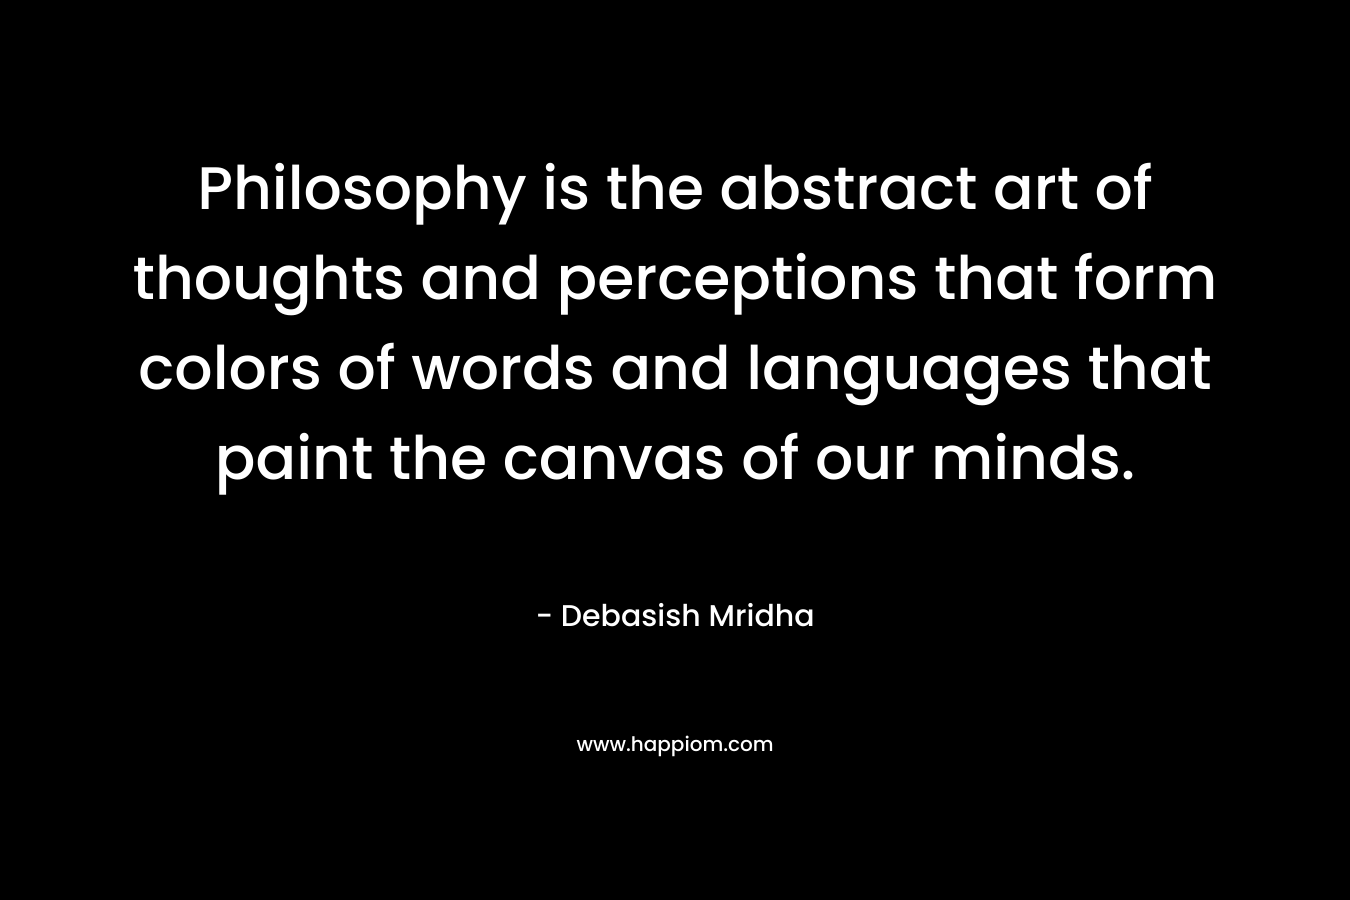 Philosophy is the abstract art of thoughts and perceptions that form colors of words and languages that paint the canvas of our minds.